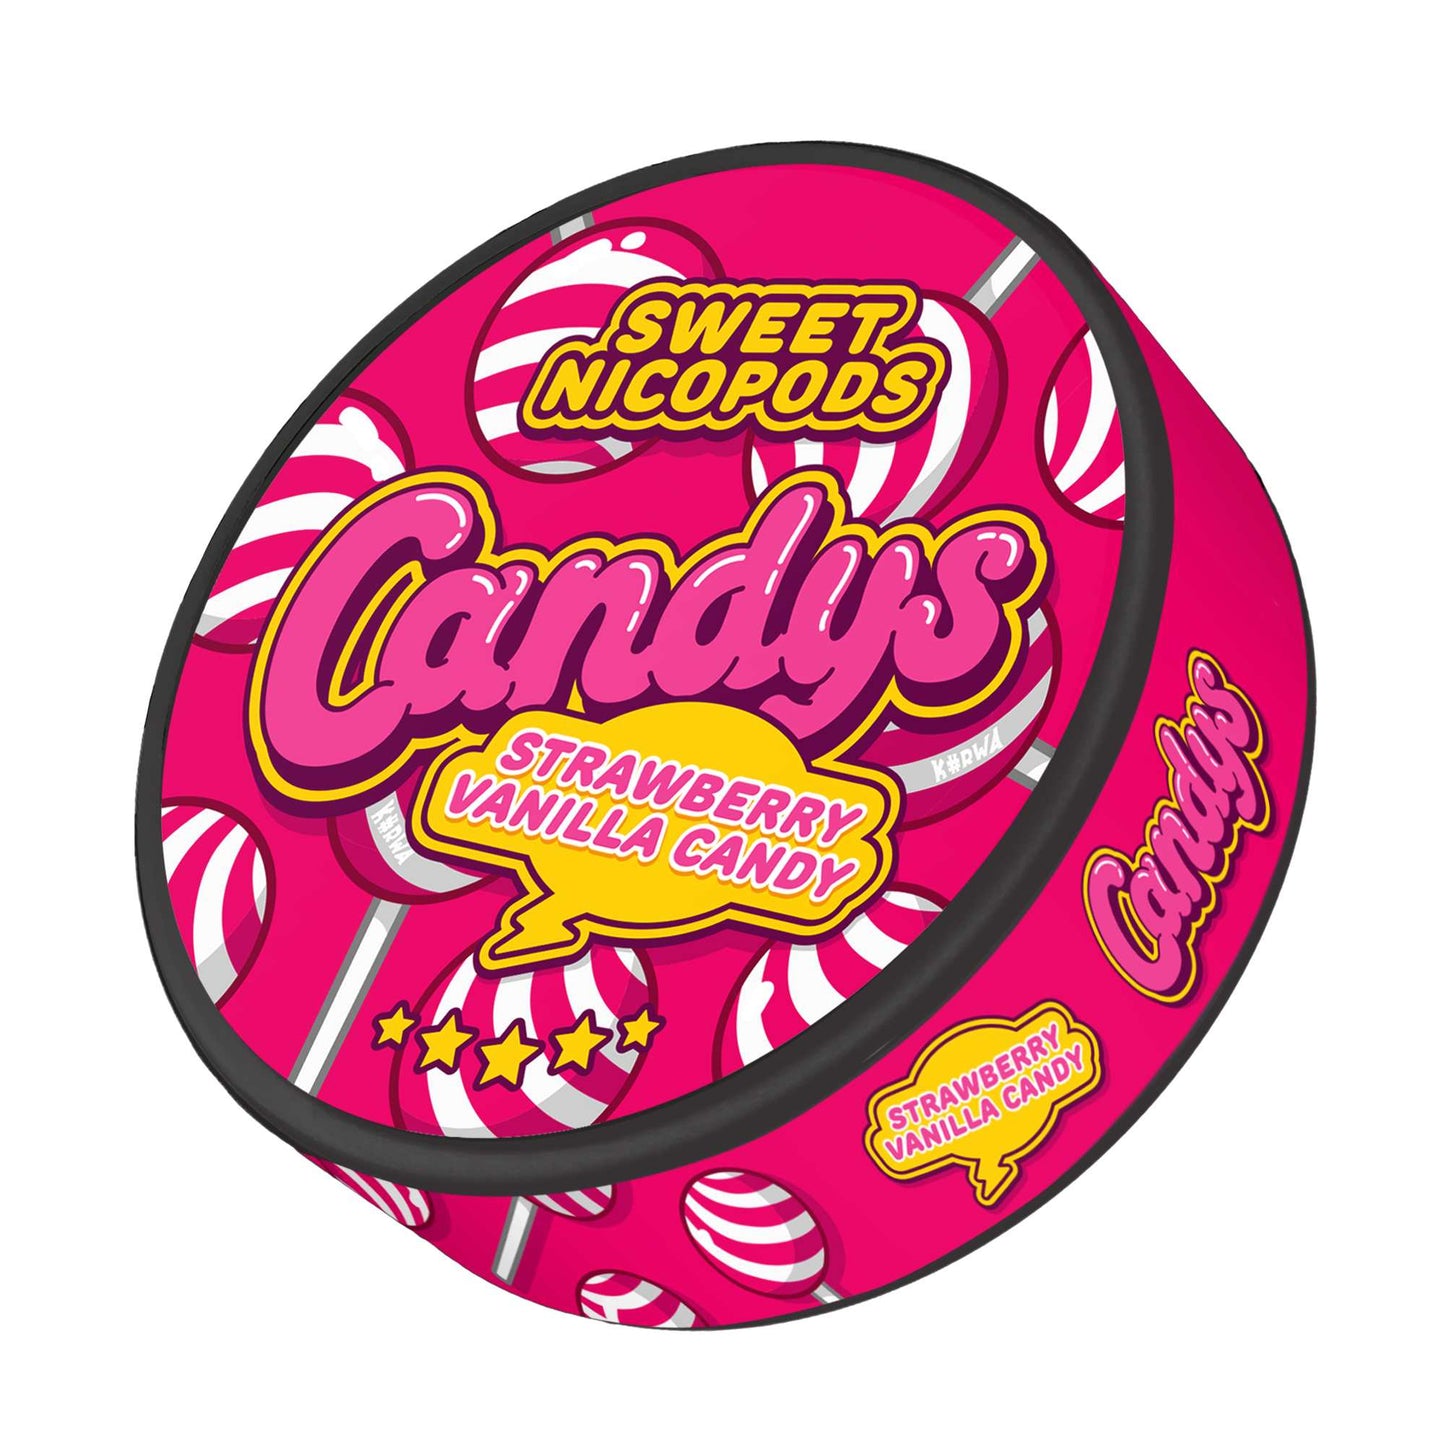 Candy’s Strawberry vanilla candy Nicotine Pouches, Snus 46.9mg/g